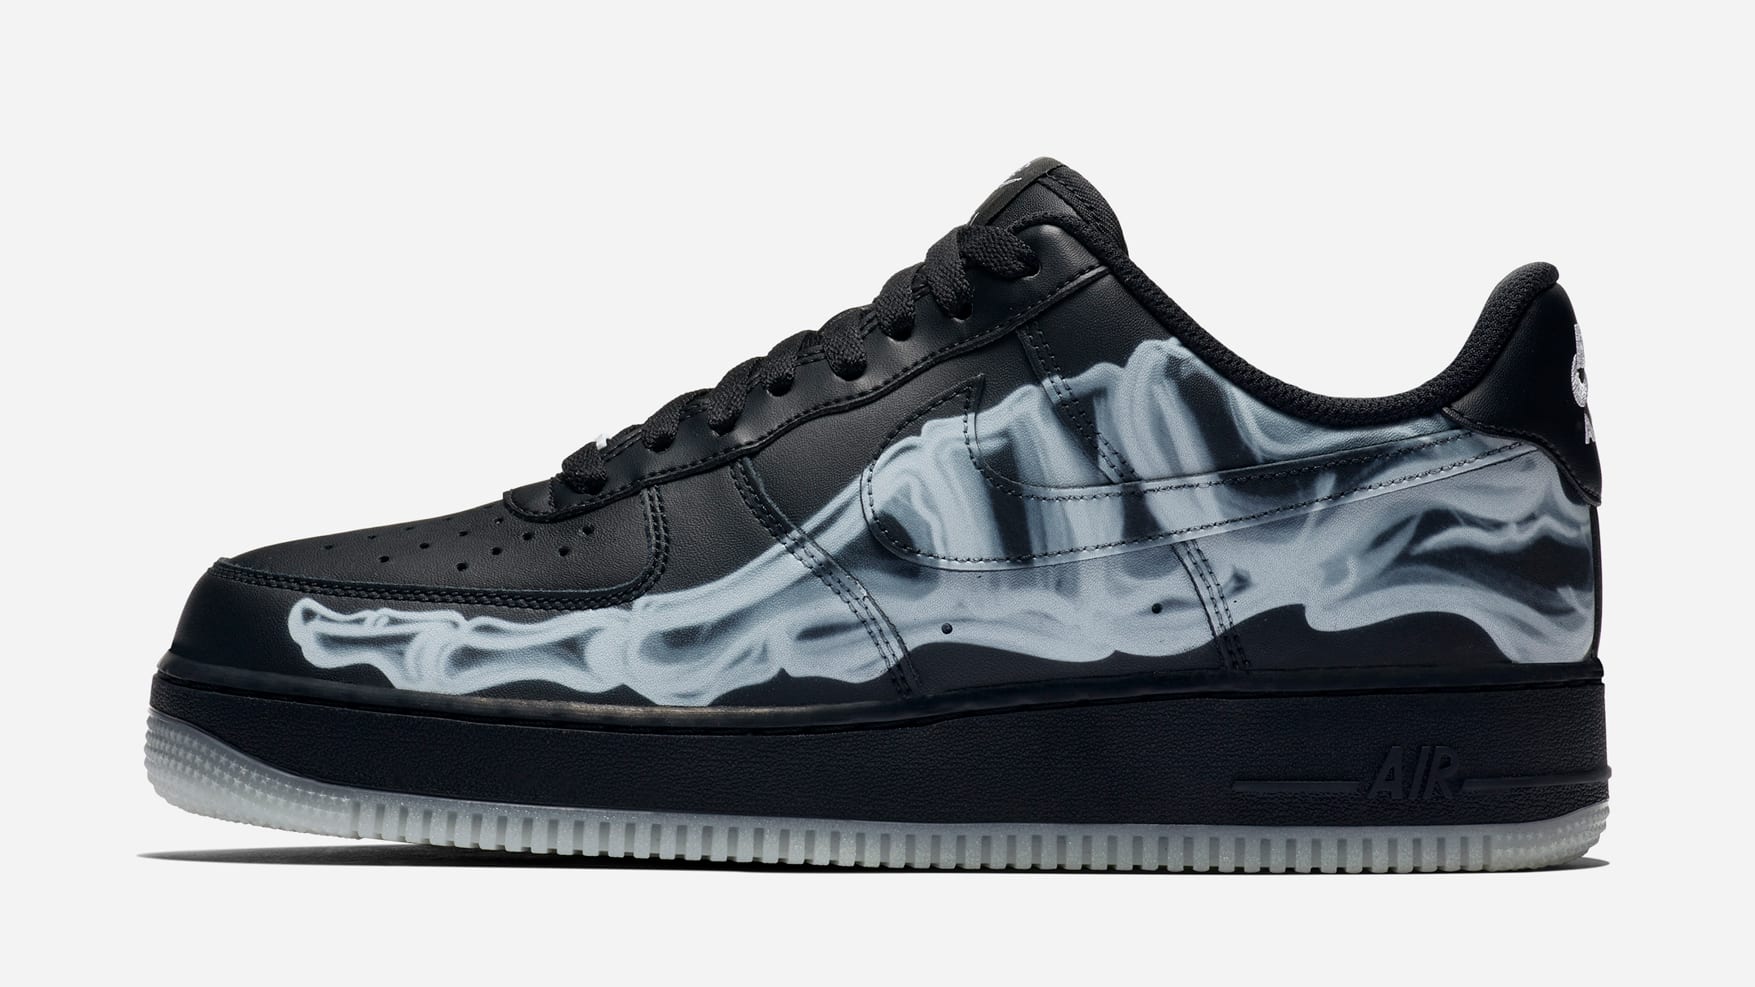 Nike's New 'Skeleton' Air Force 1 Drops Just Before Halloween